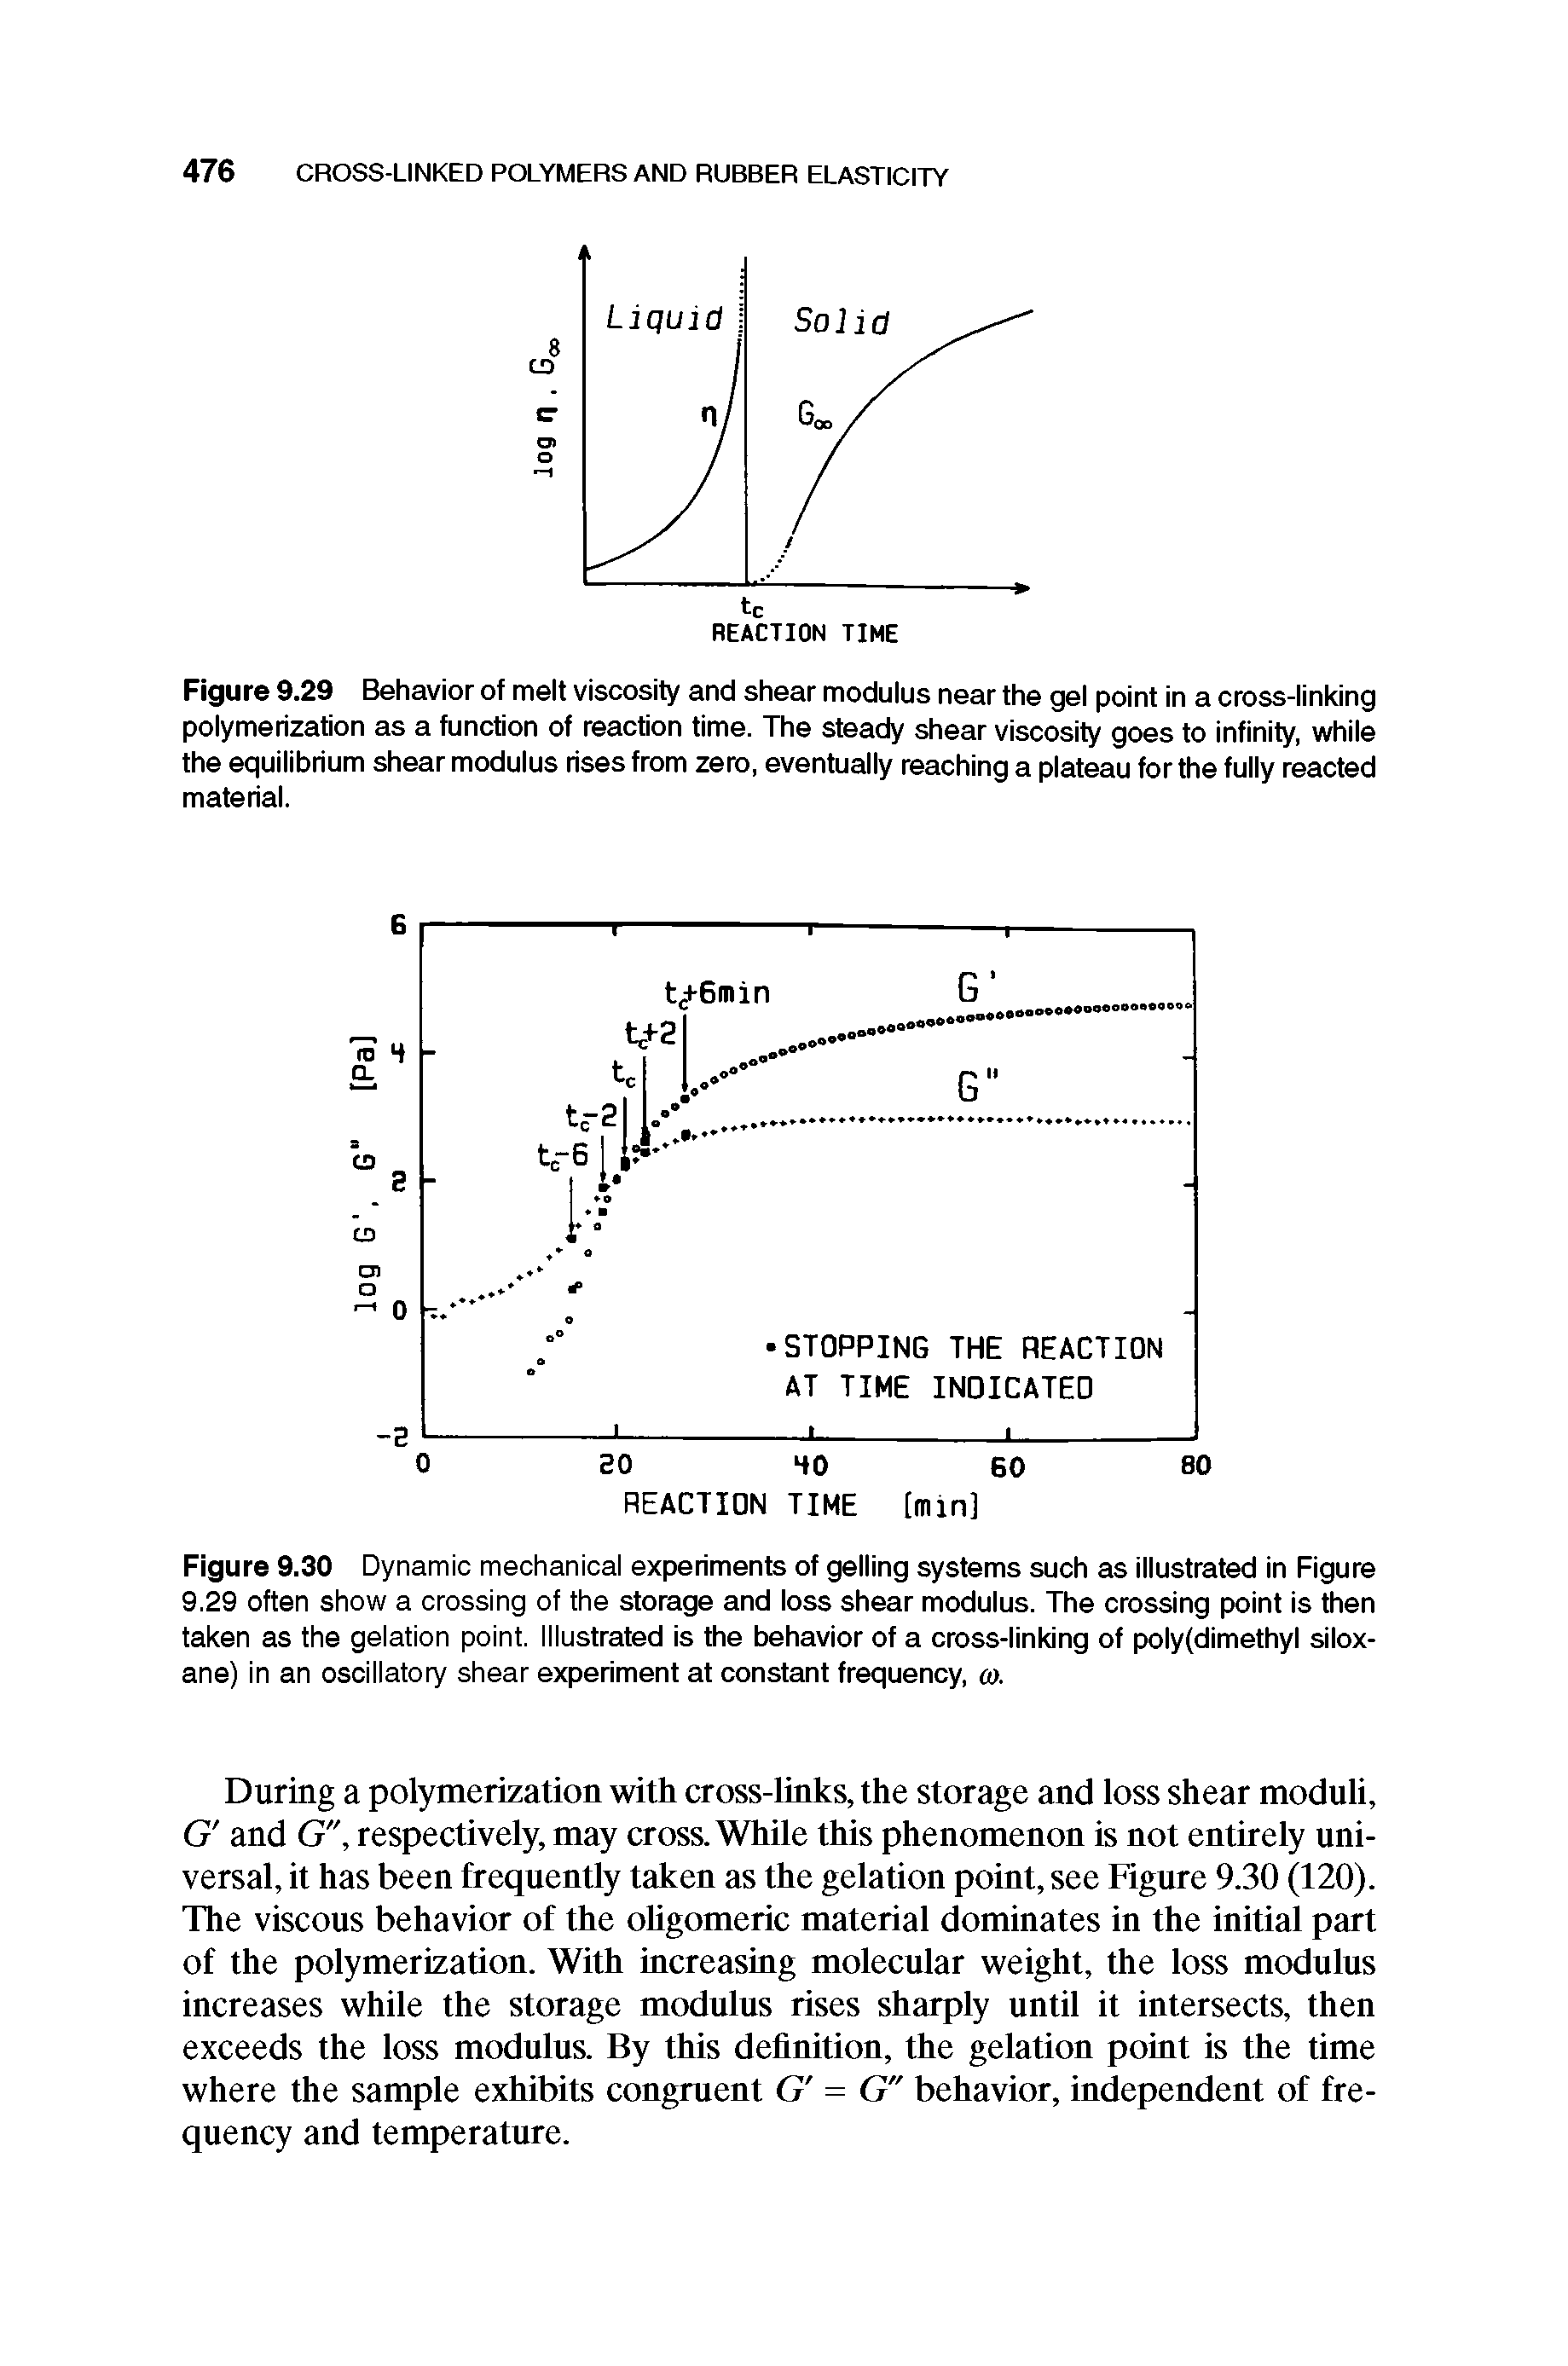 Figure 9.29 Behavior of melt viscosity and shear modulus near the gel point in a cross-linking polymerization as a tunction of reaction time. The steady shear viscosity goes to infinity, while the equilibrium shear modulus rises from zero, eventually reaching a plateau for the fully reacted material.